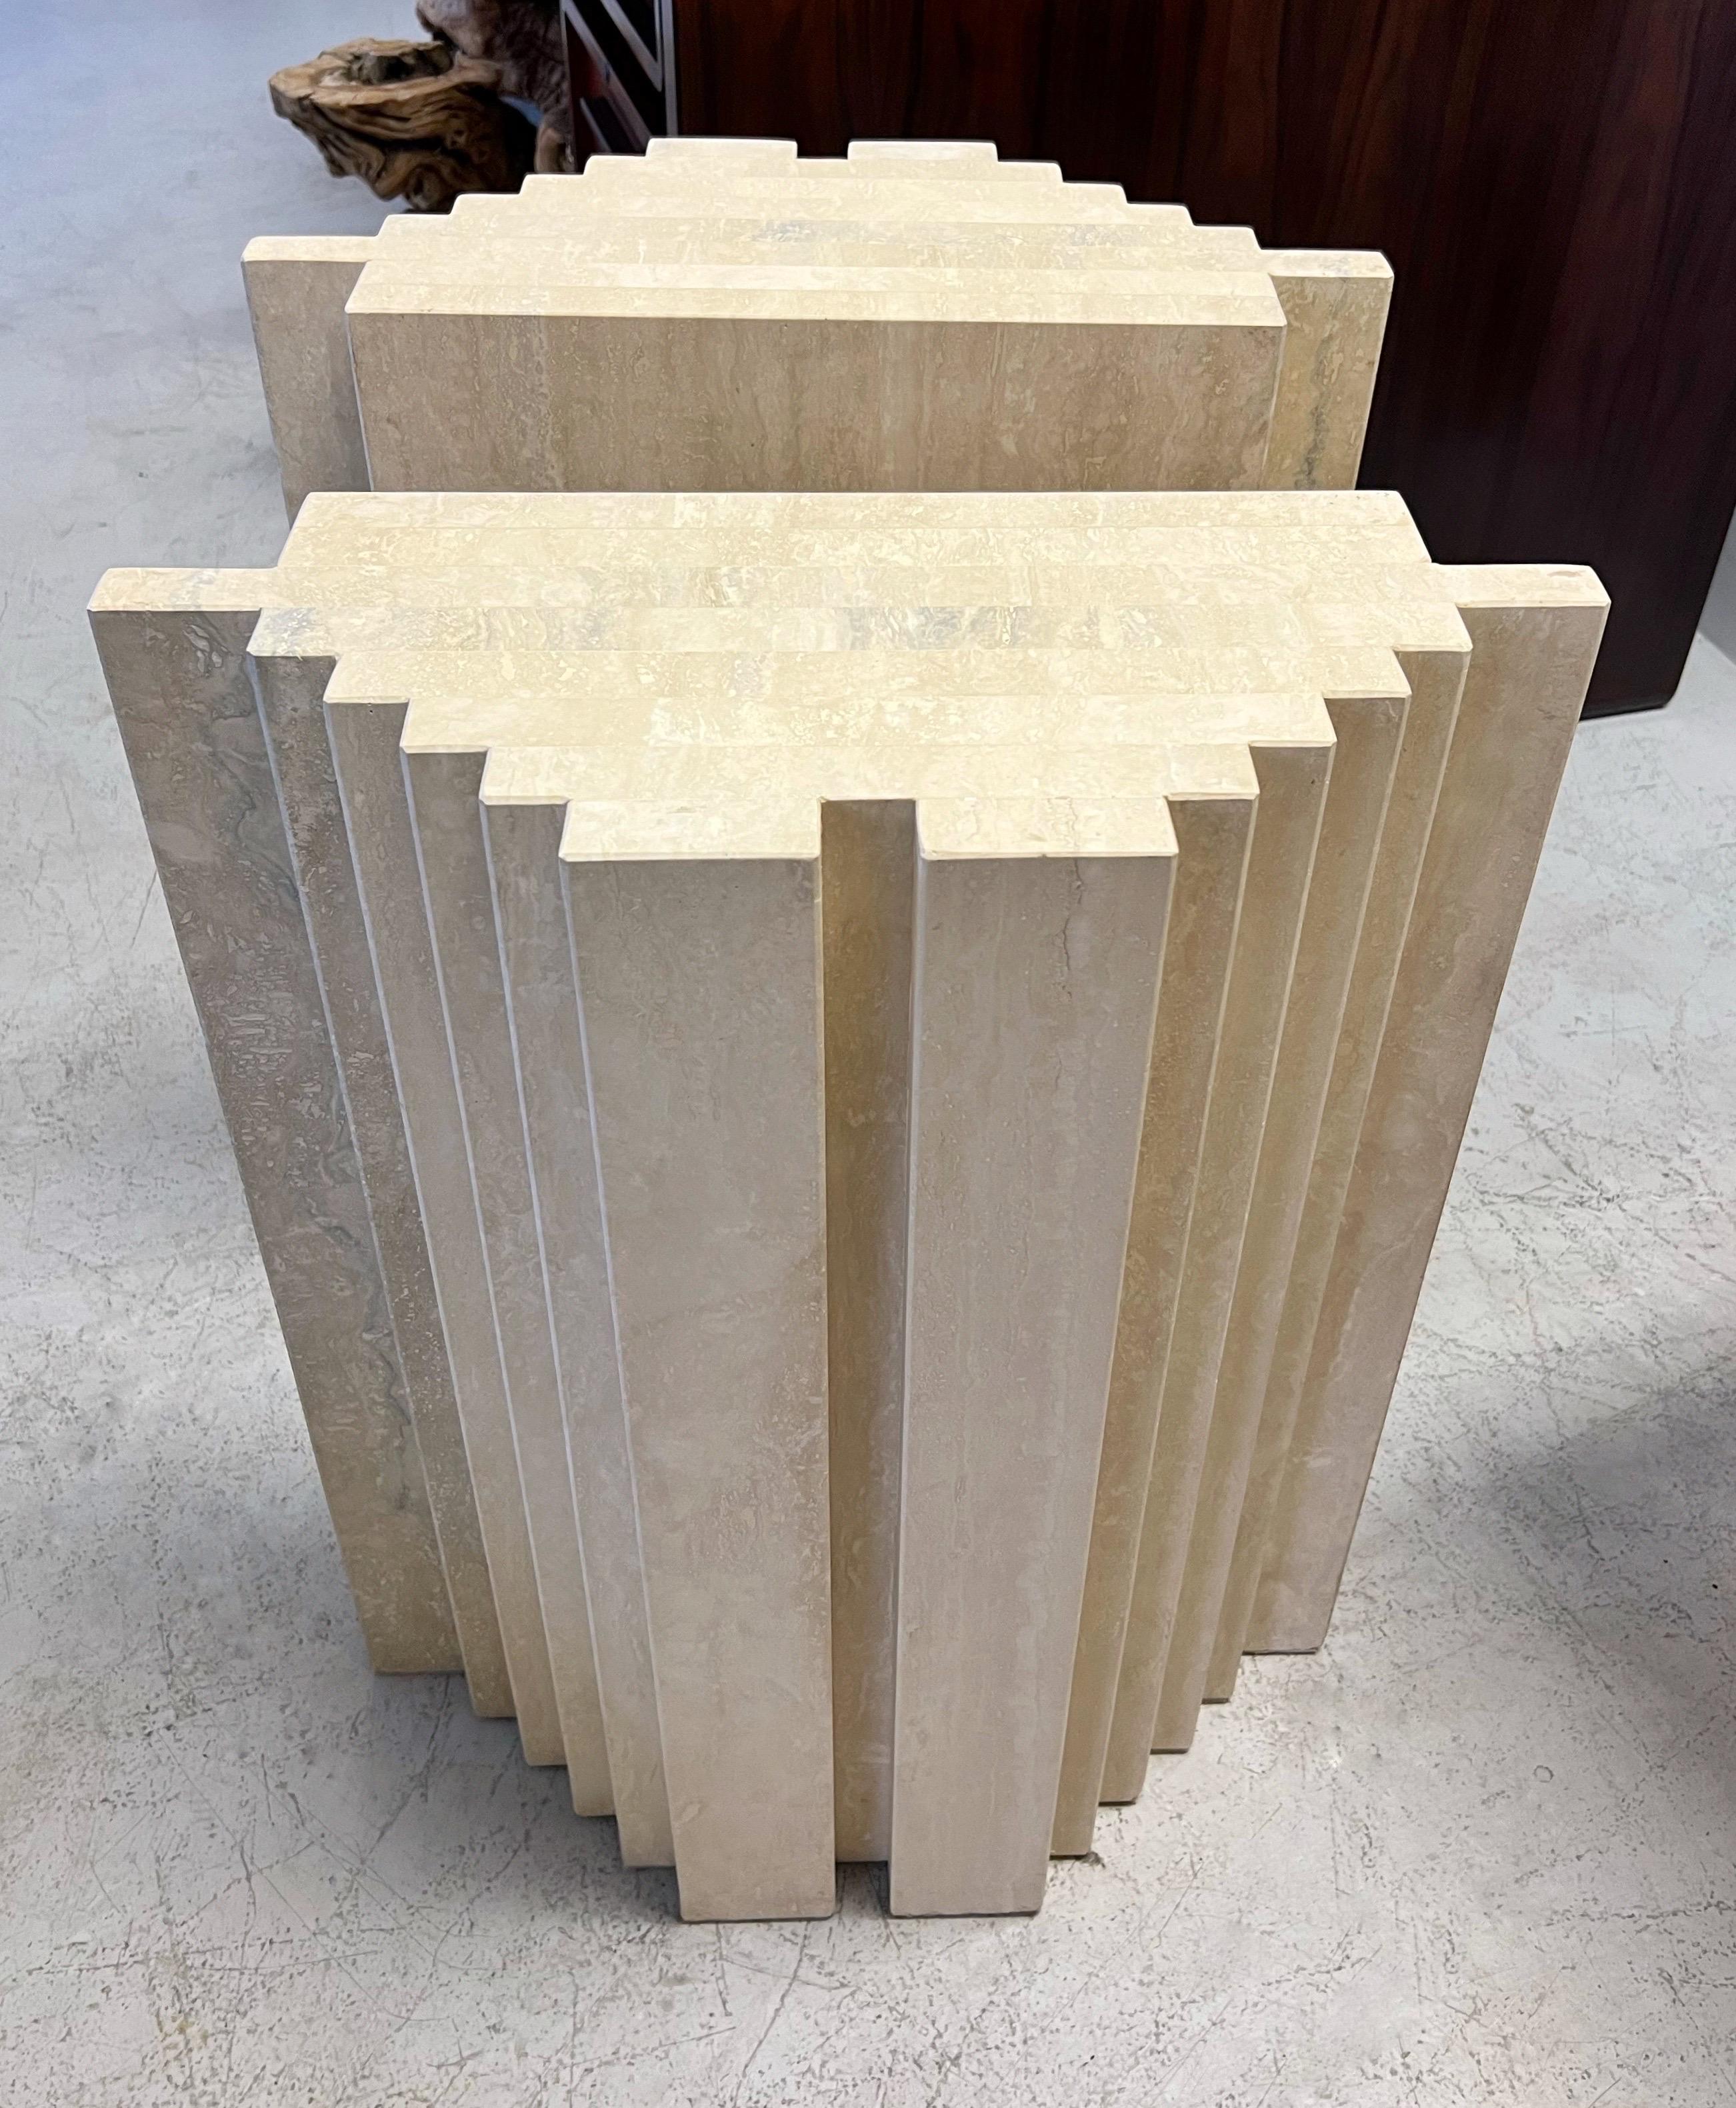 Wonderful solid travertine marble table or console bases. Very clean design, meticulously crafted. The stepped design is crisp and perfectly proportioned. 
Could be used for a large rectangular dining table as well as a round or oval. Or as one or